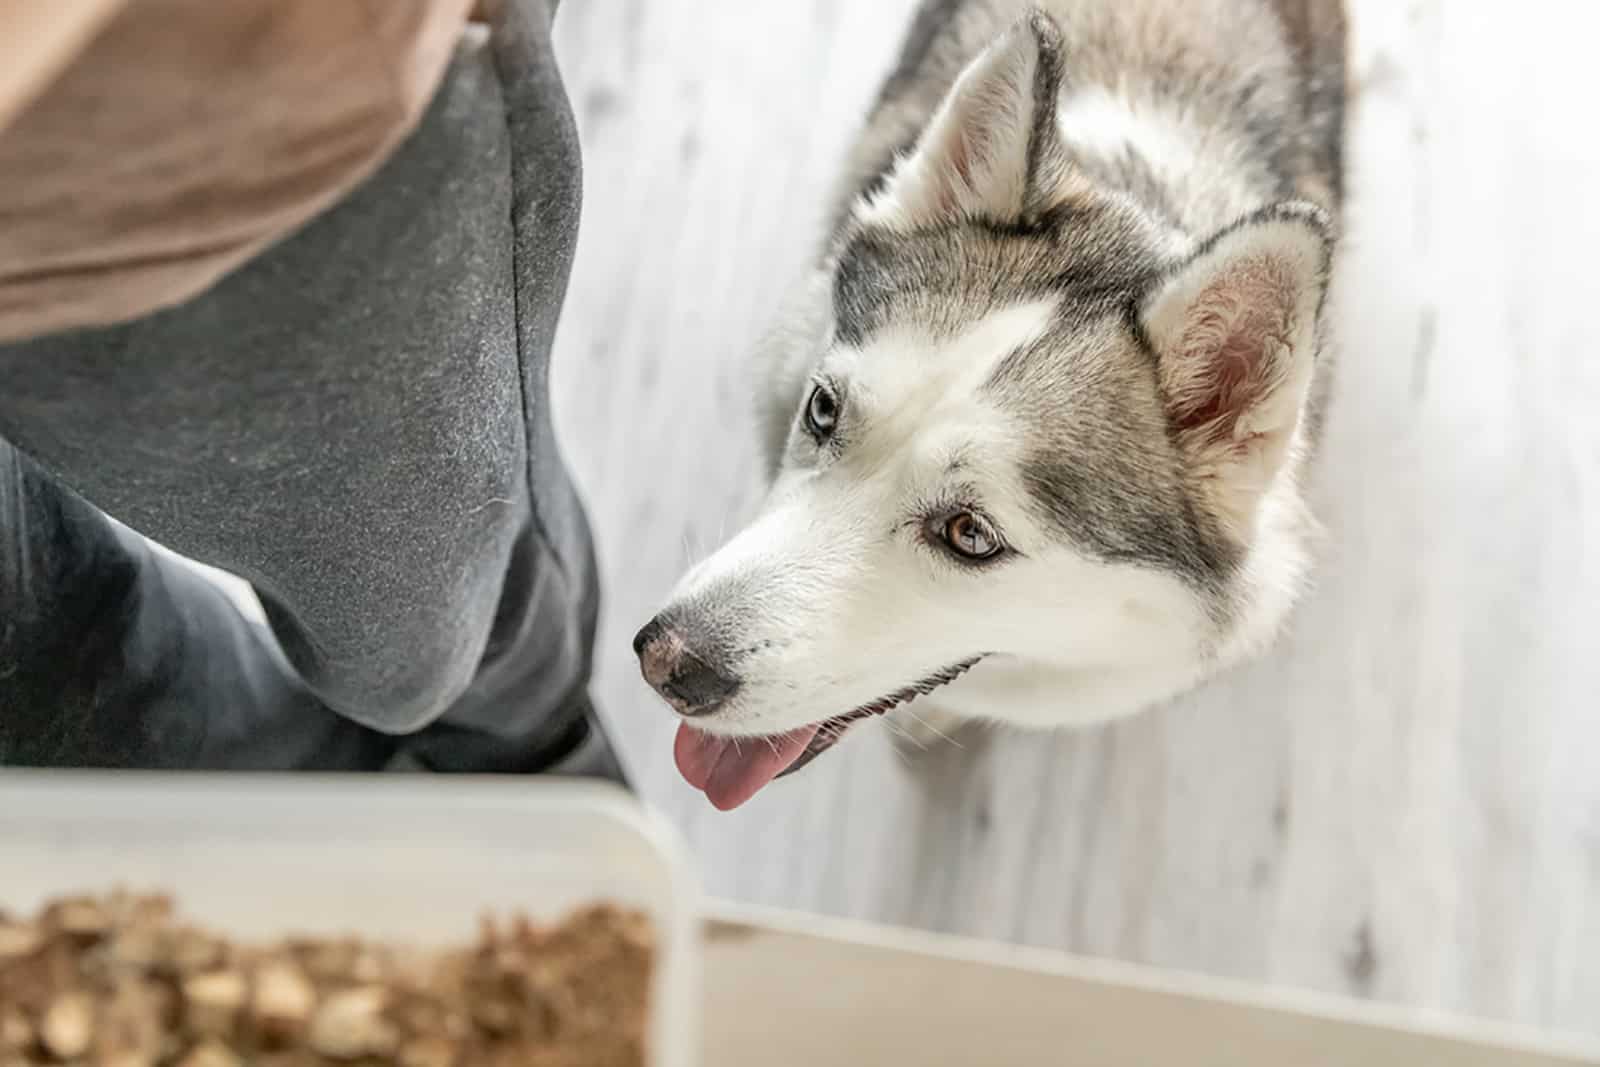 husky dog looks at a bowl of food standing on the table